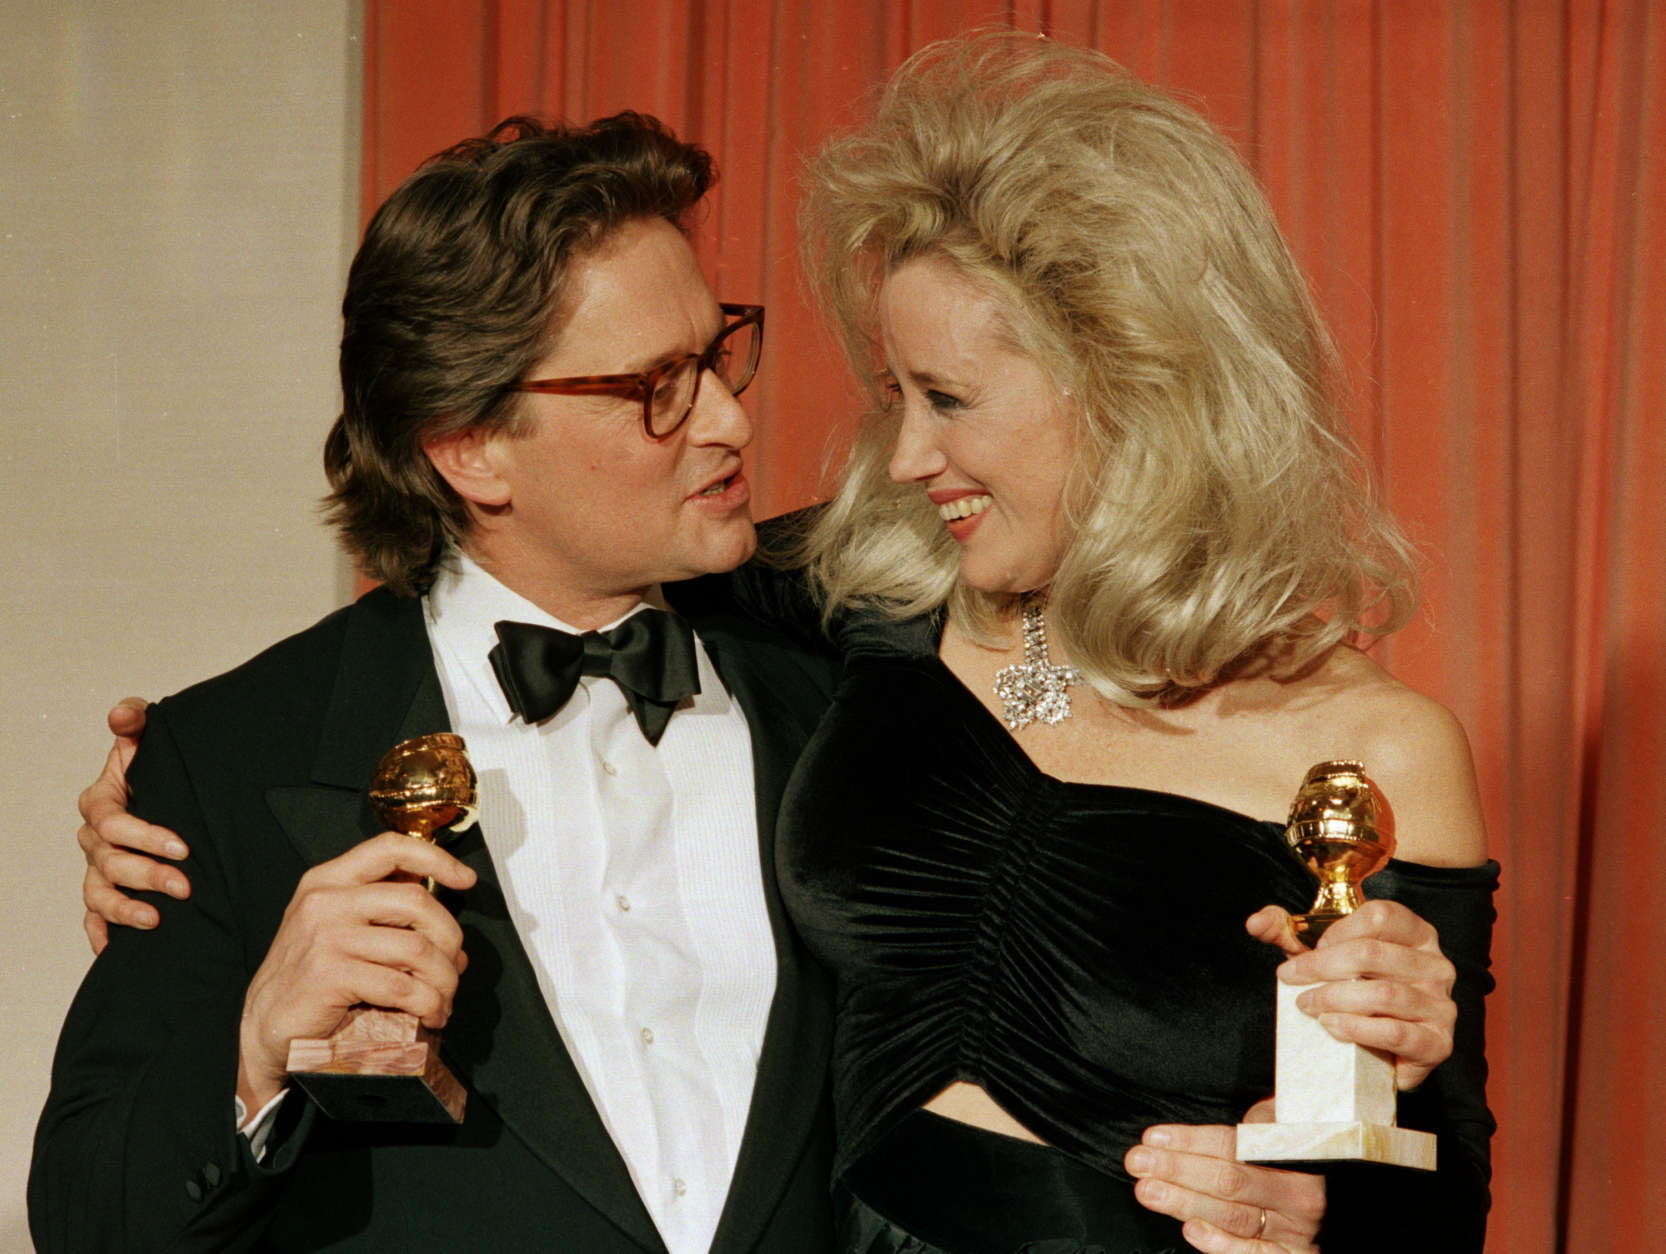 Michael Douglas, left, and Sally Kirkland congratulate each other backstage at the Beverly Hilton Hotel after winning awards at the 45th Annual Golden Globe Awards presentations in Beverly Hills, Ca., Jan. 24, 1988.  Douglas won best actor for his role in "Wall Street" and Kirkland won best actress for her role in "Anna."  (AP Photo/Reed Saxon)